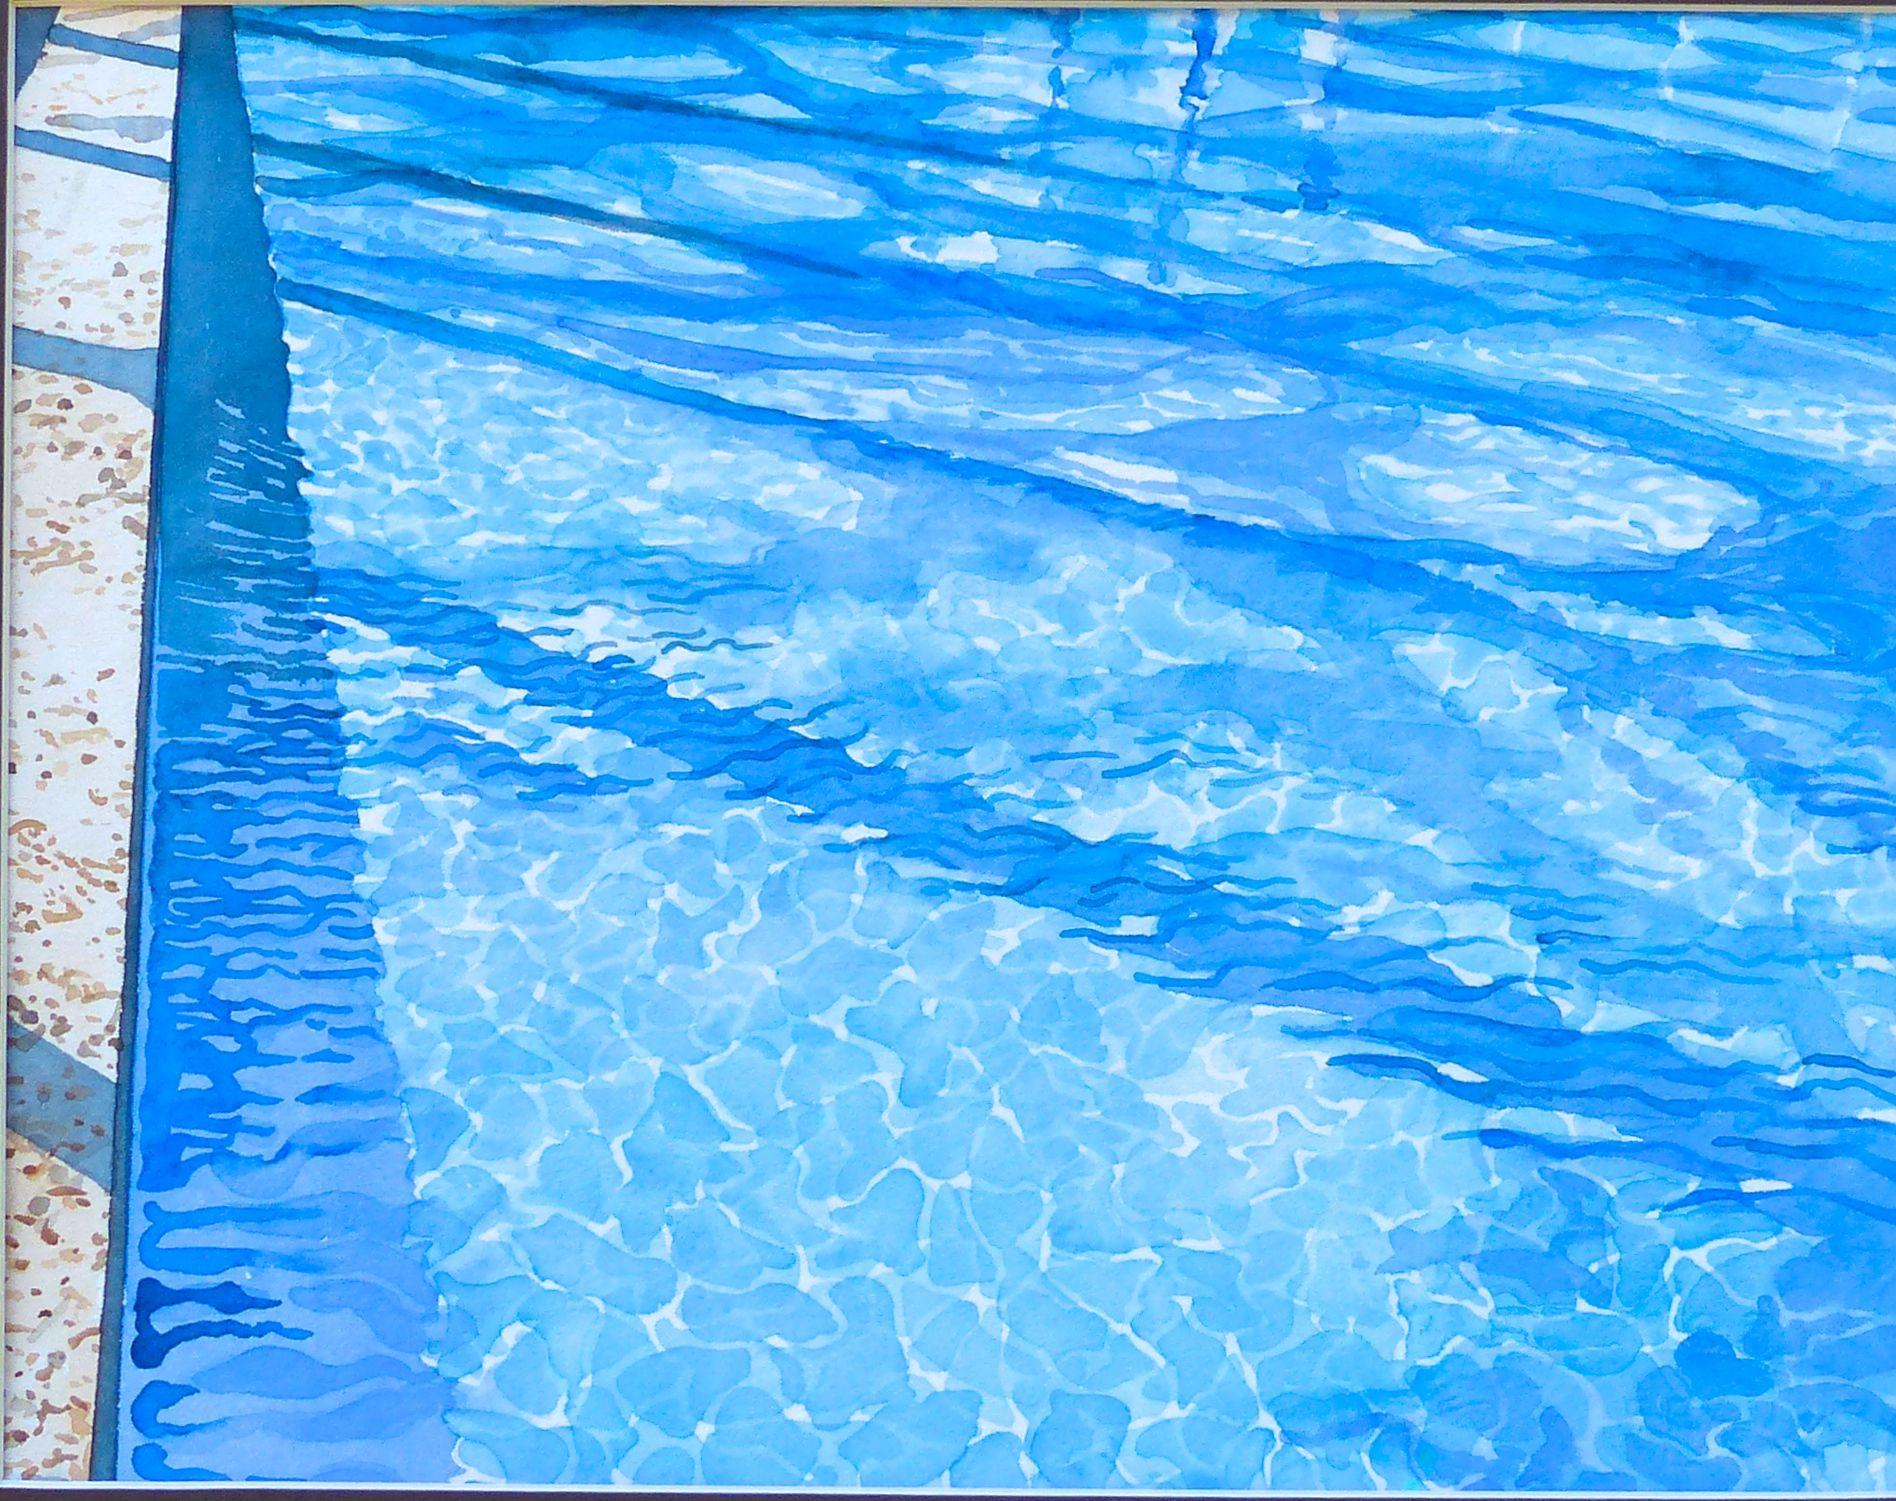 Tree Shadows on Pool, Painting, Watercolor on Watercolor Paper - Art by Leslie White